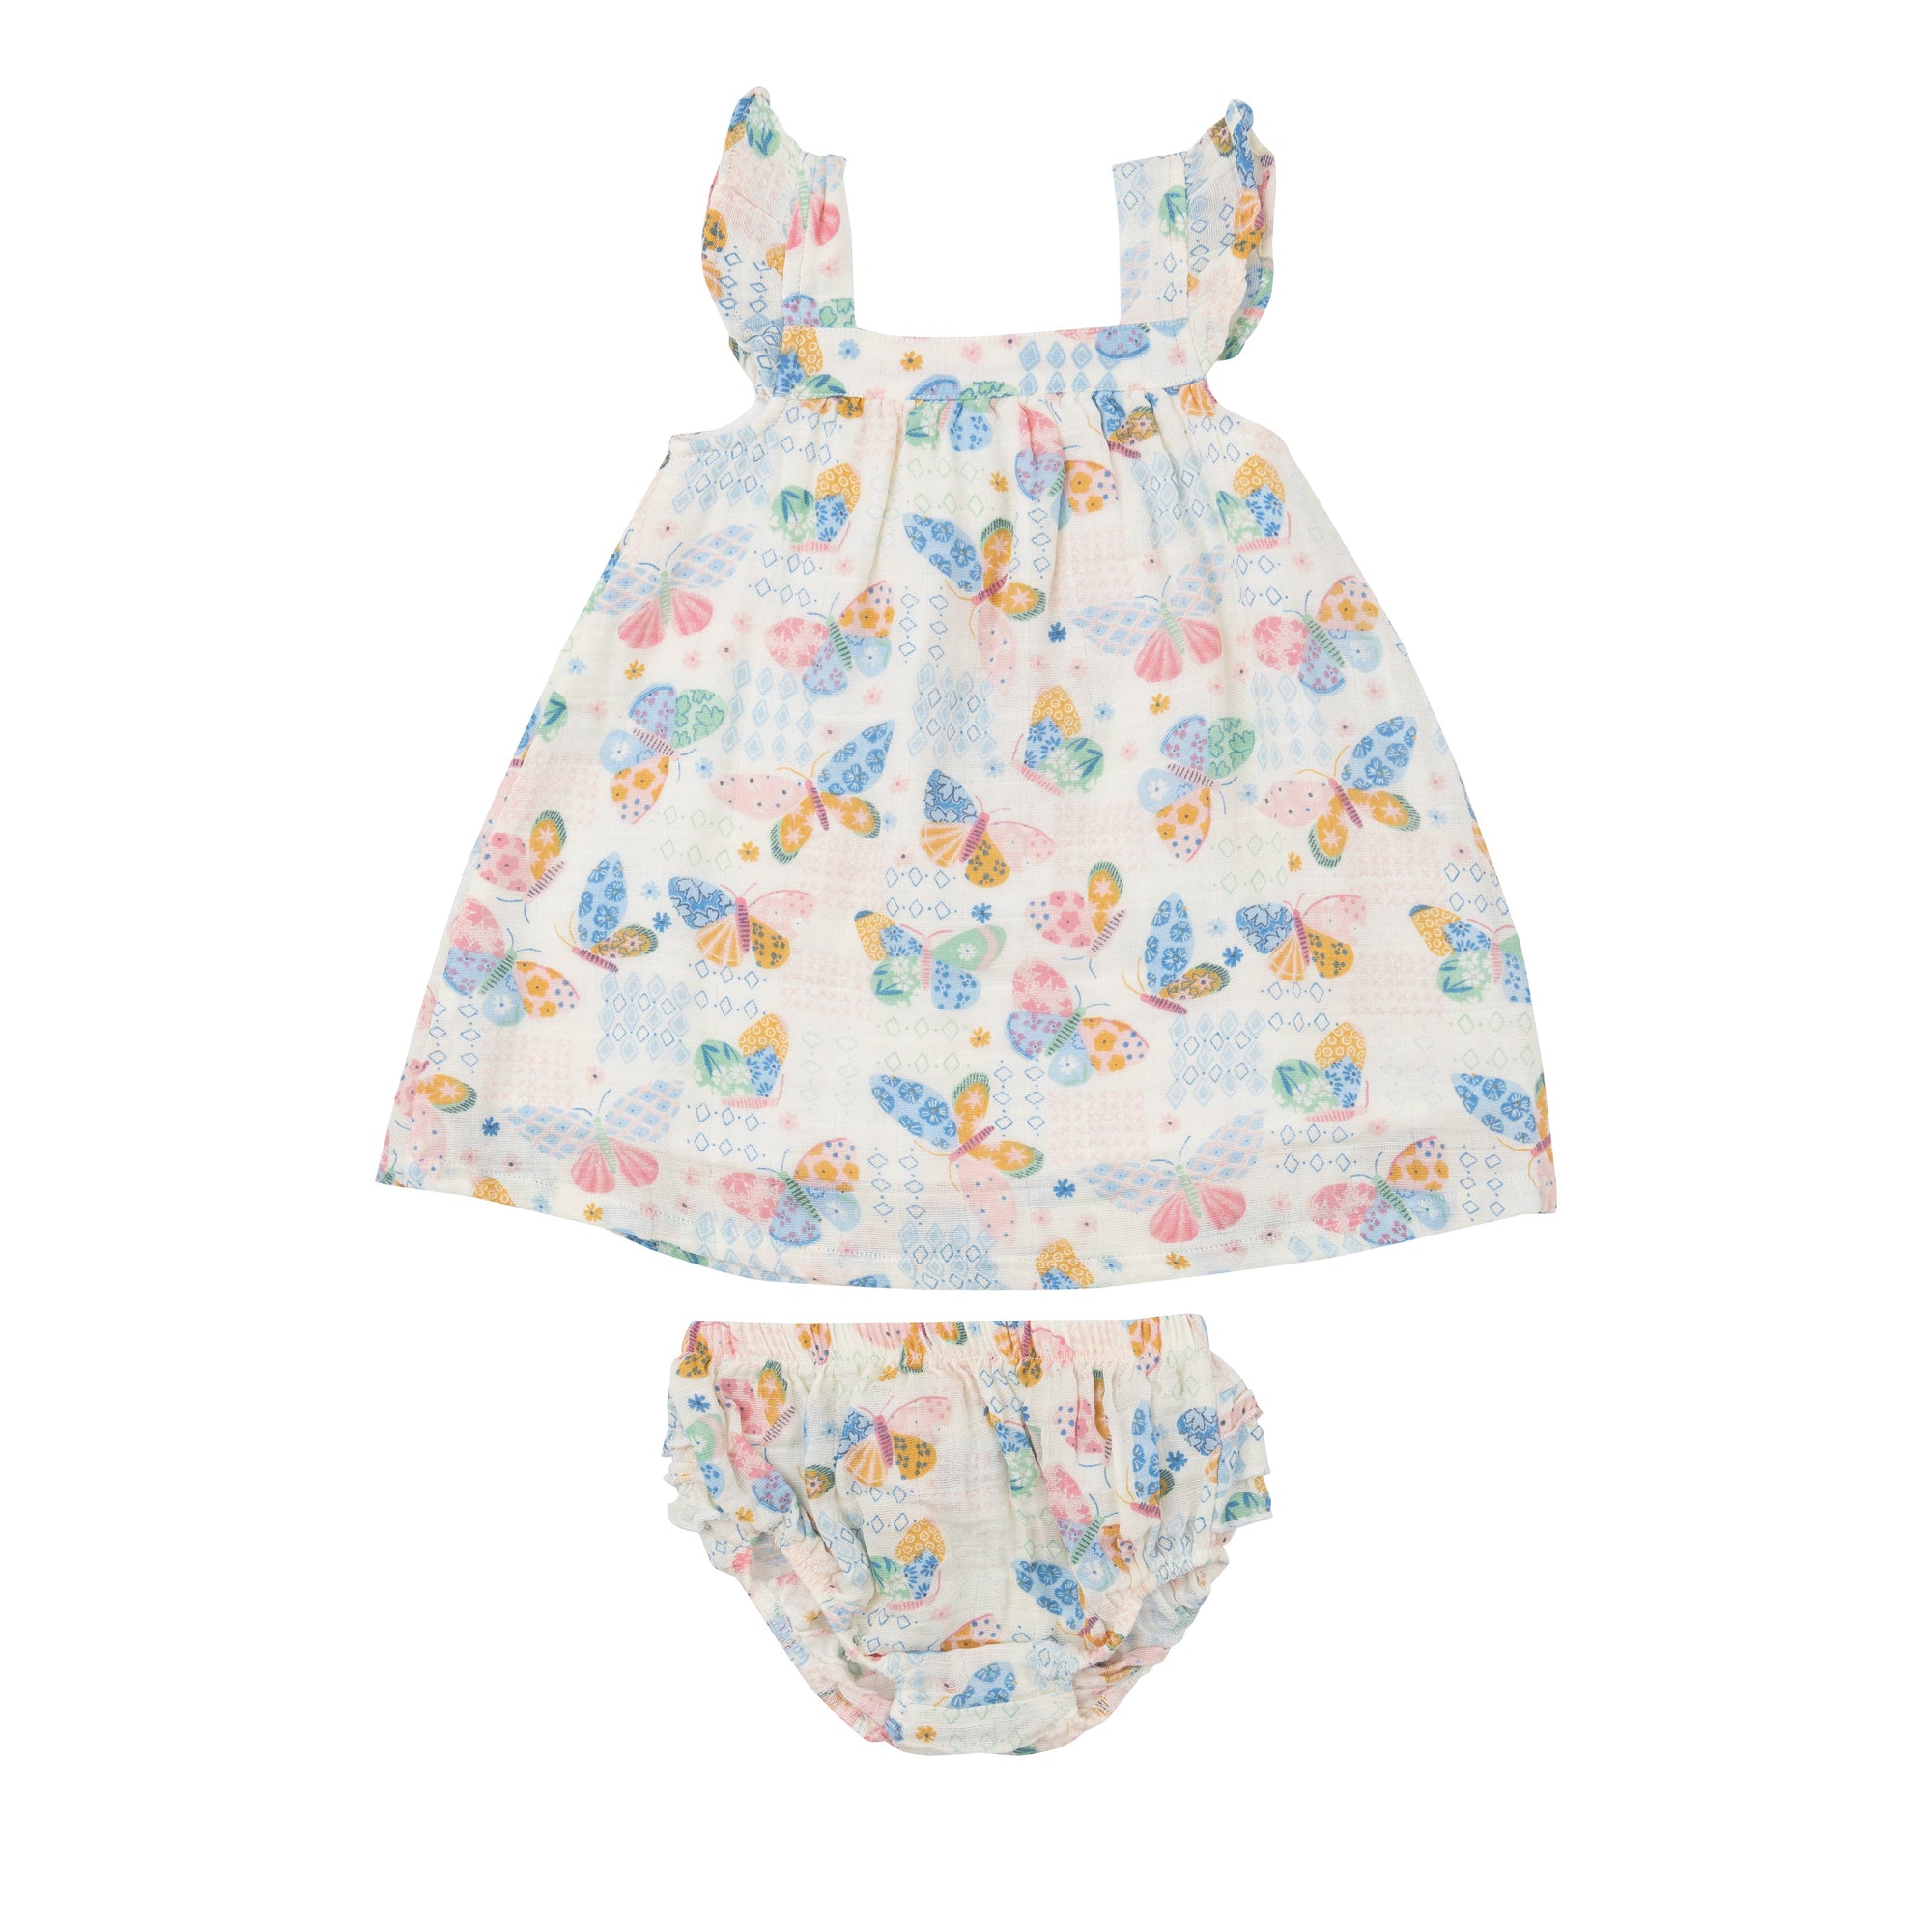 Butterfly Patchwork Muslin Sundress and Diaper Cover